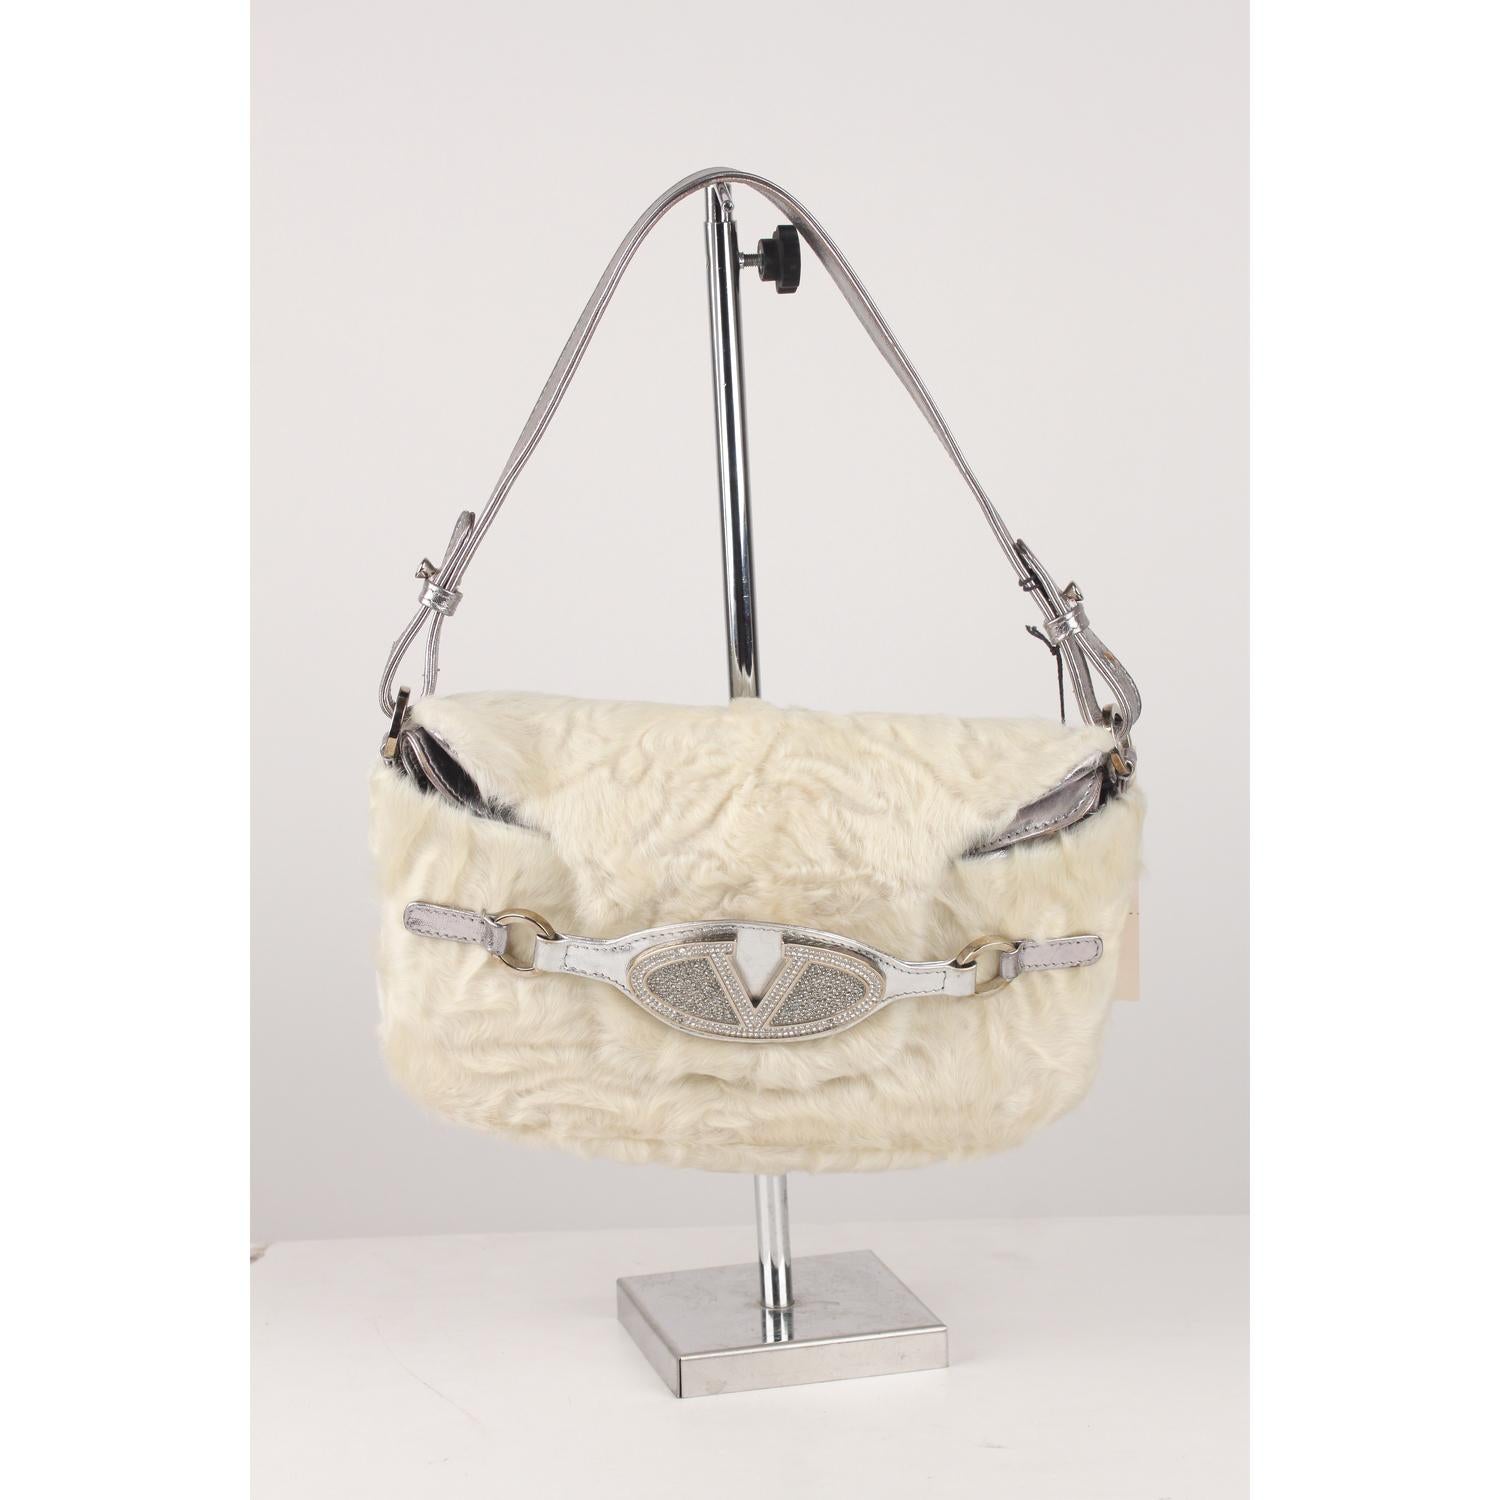 Sophisticated Valentino Garavani  shoulder bag crafted in white fur and silver leather.  The front flap closure is embellished with crystal studded Valentino logo. It features a double flap design and an adjustable shoulder strap. Satin lining with